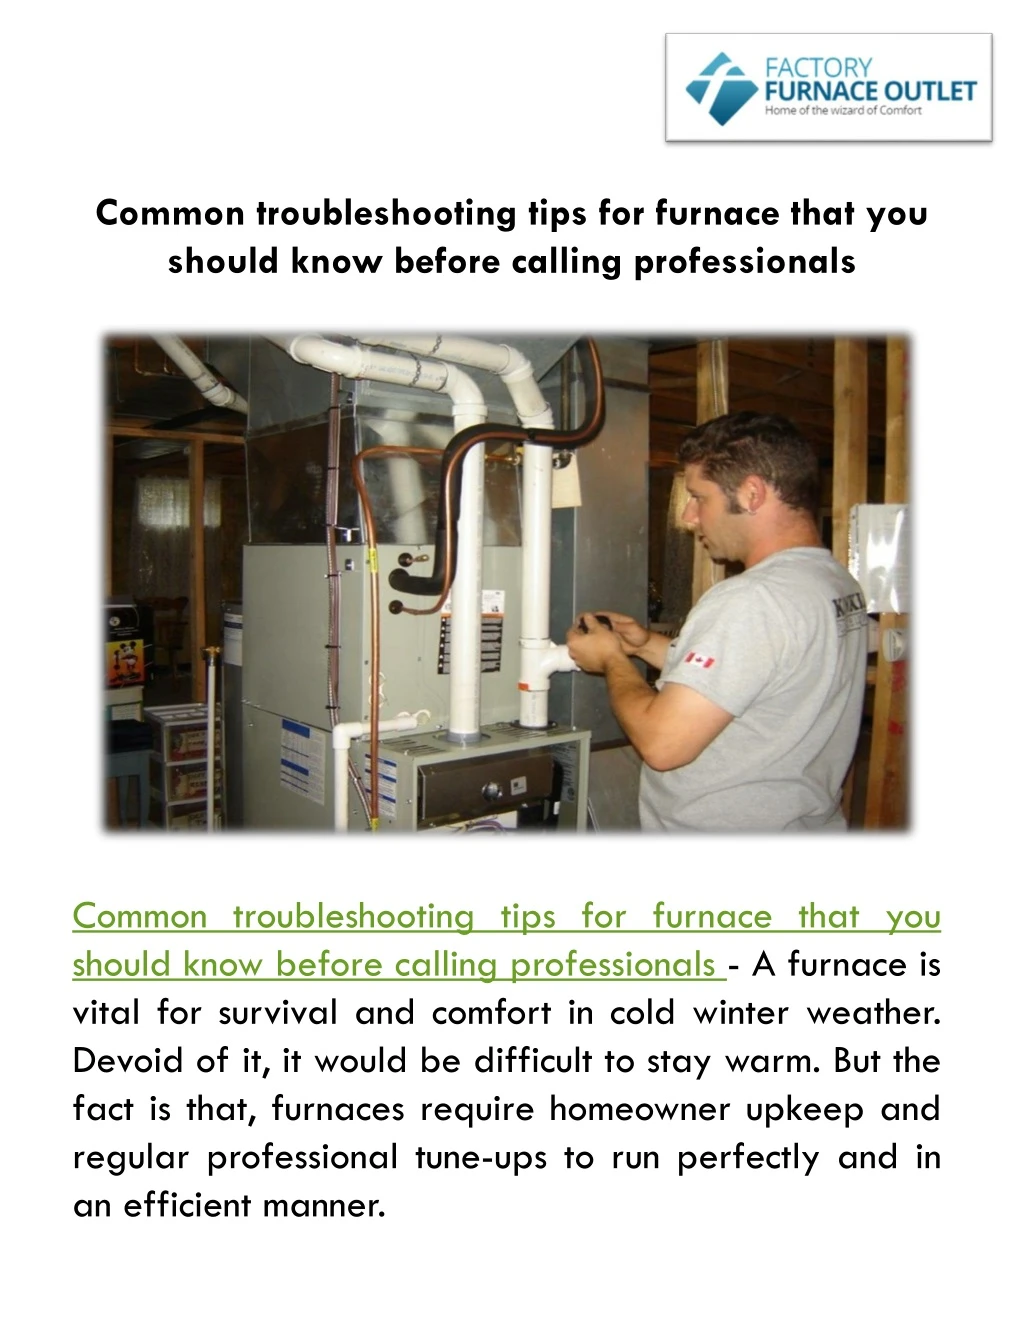 common troubleshooting tips for furnace that